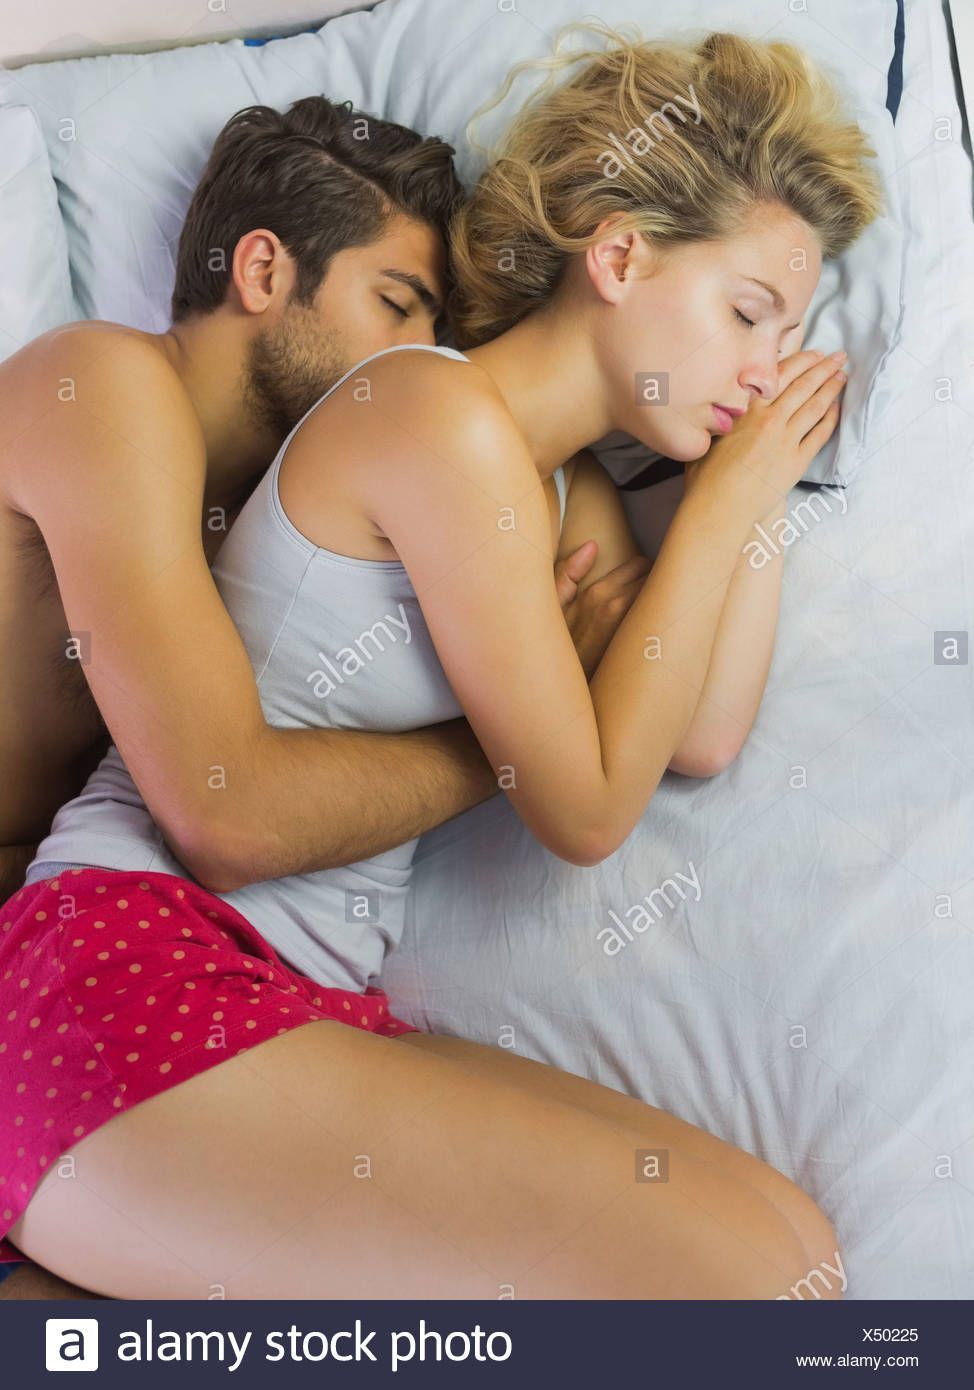 Boys with naked girls spooning